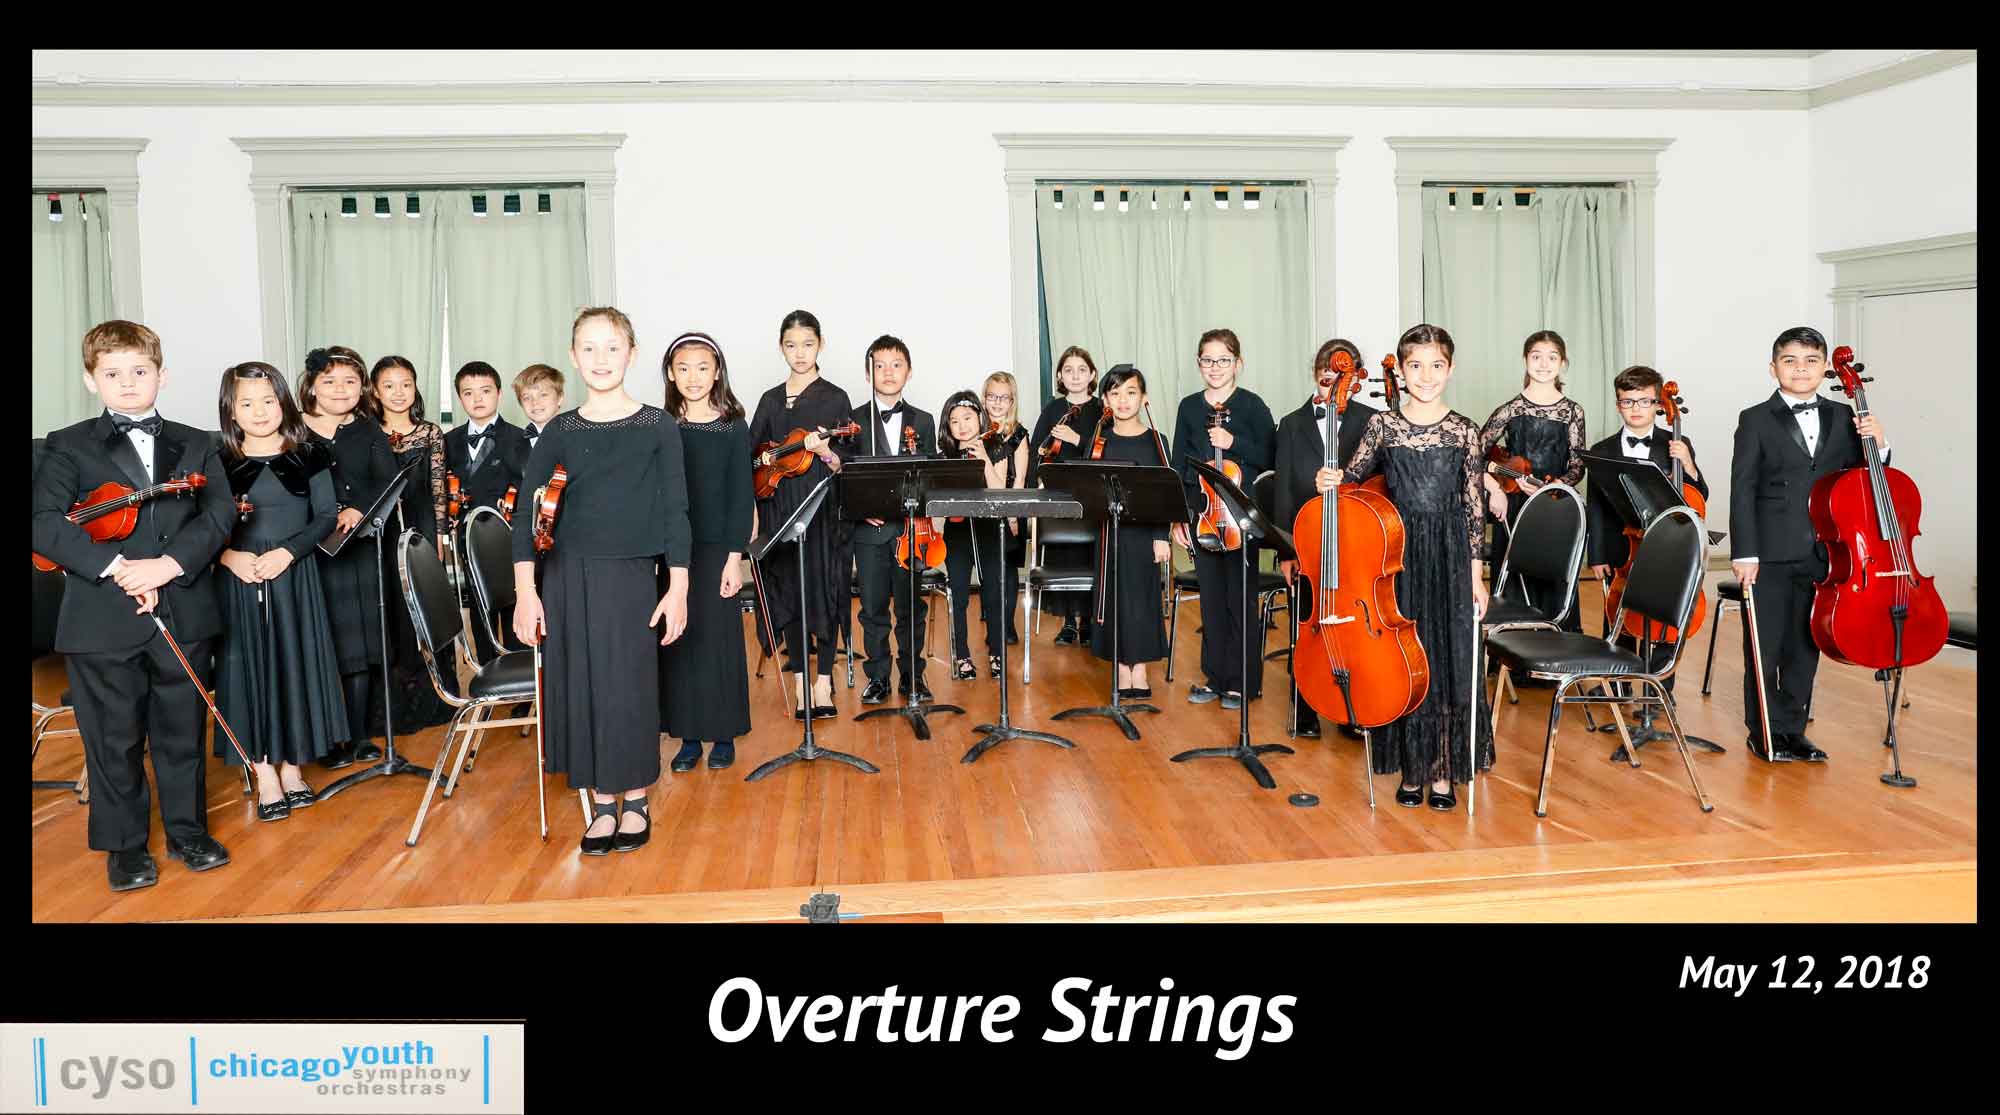 CYSO Overture Strings Group Photo by Tom Killoran